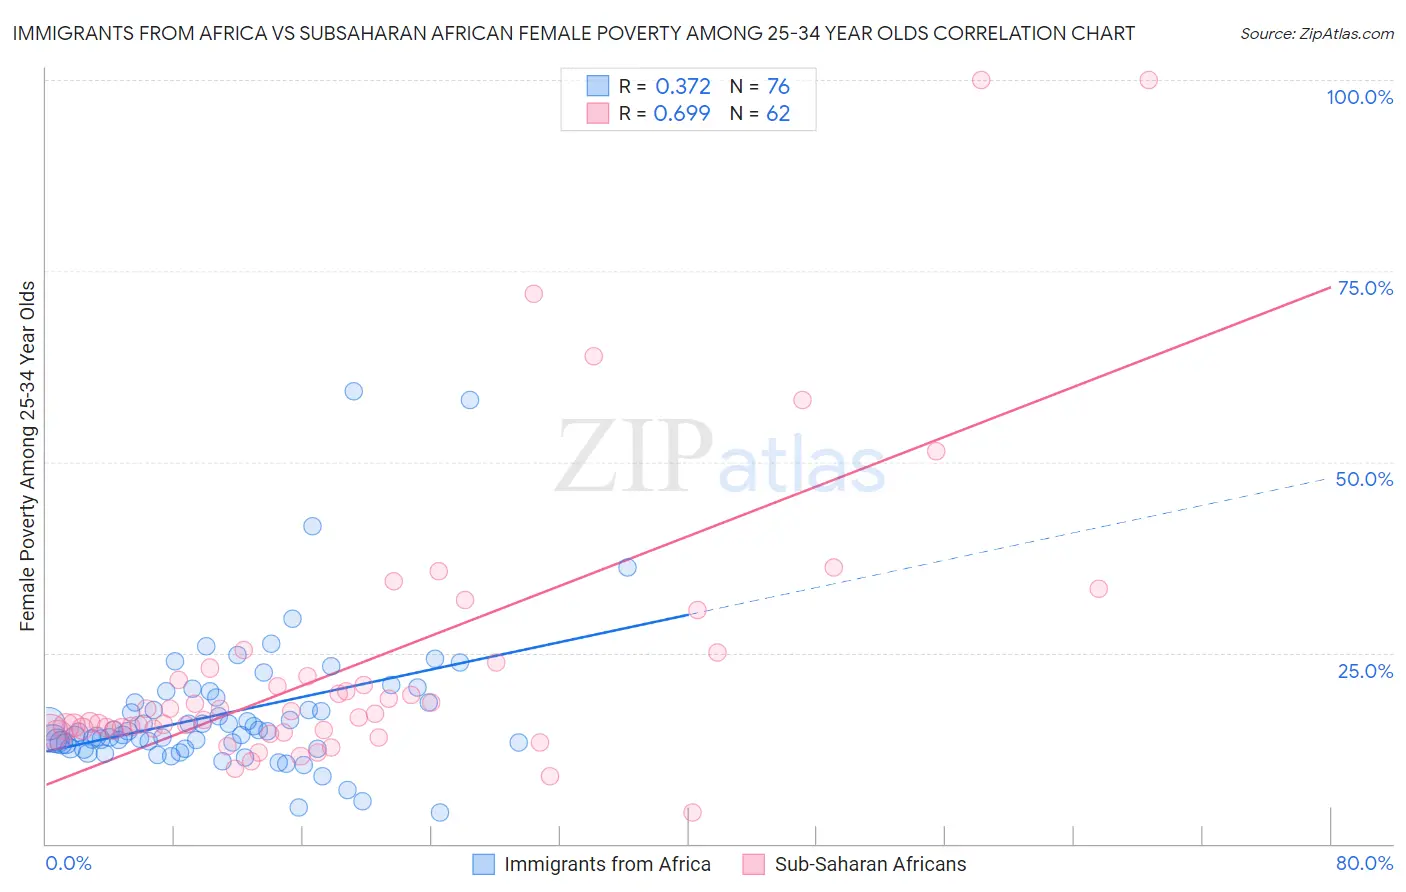 Immigrants from Africa vs Subsaharan African Female Poverty Among 25-34 Year Olds